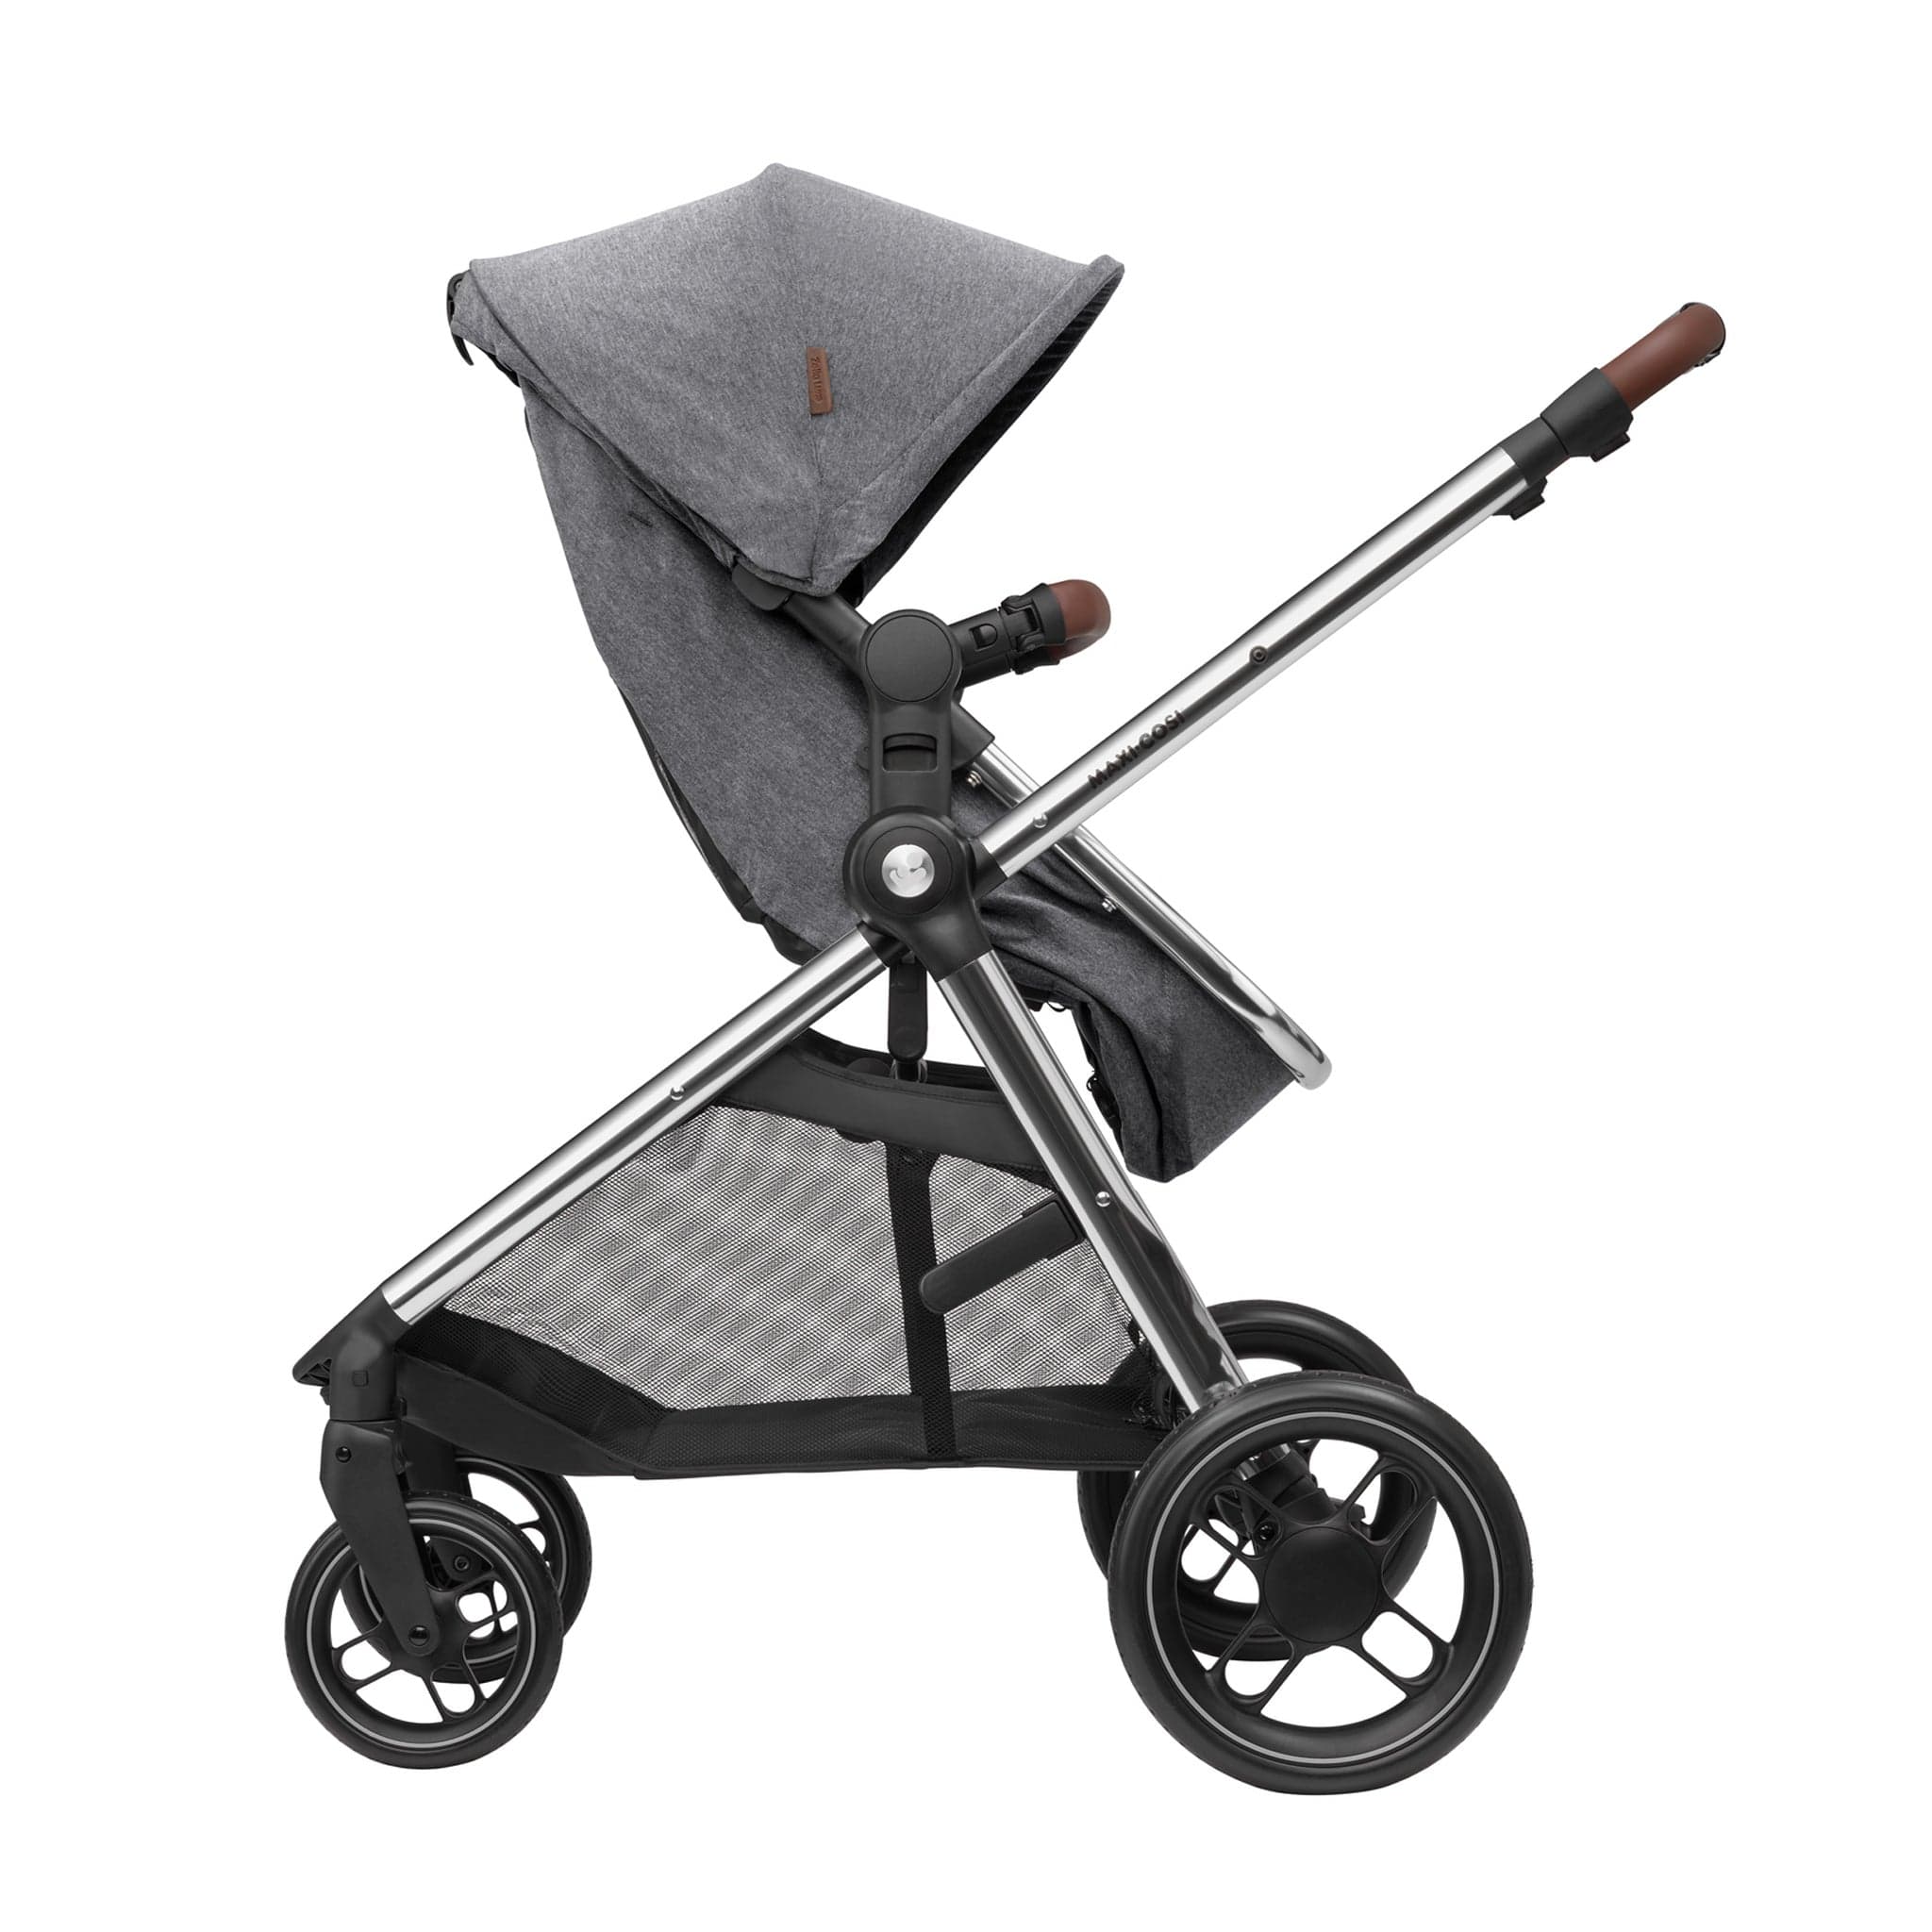 Maxi-Cosi Zelia Luxe with Cabriofix i-Size Travel System in Twillic Grey Travel Systems 11075-TWI-GRY 3220660337965